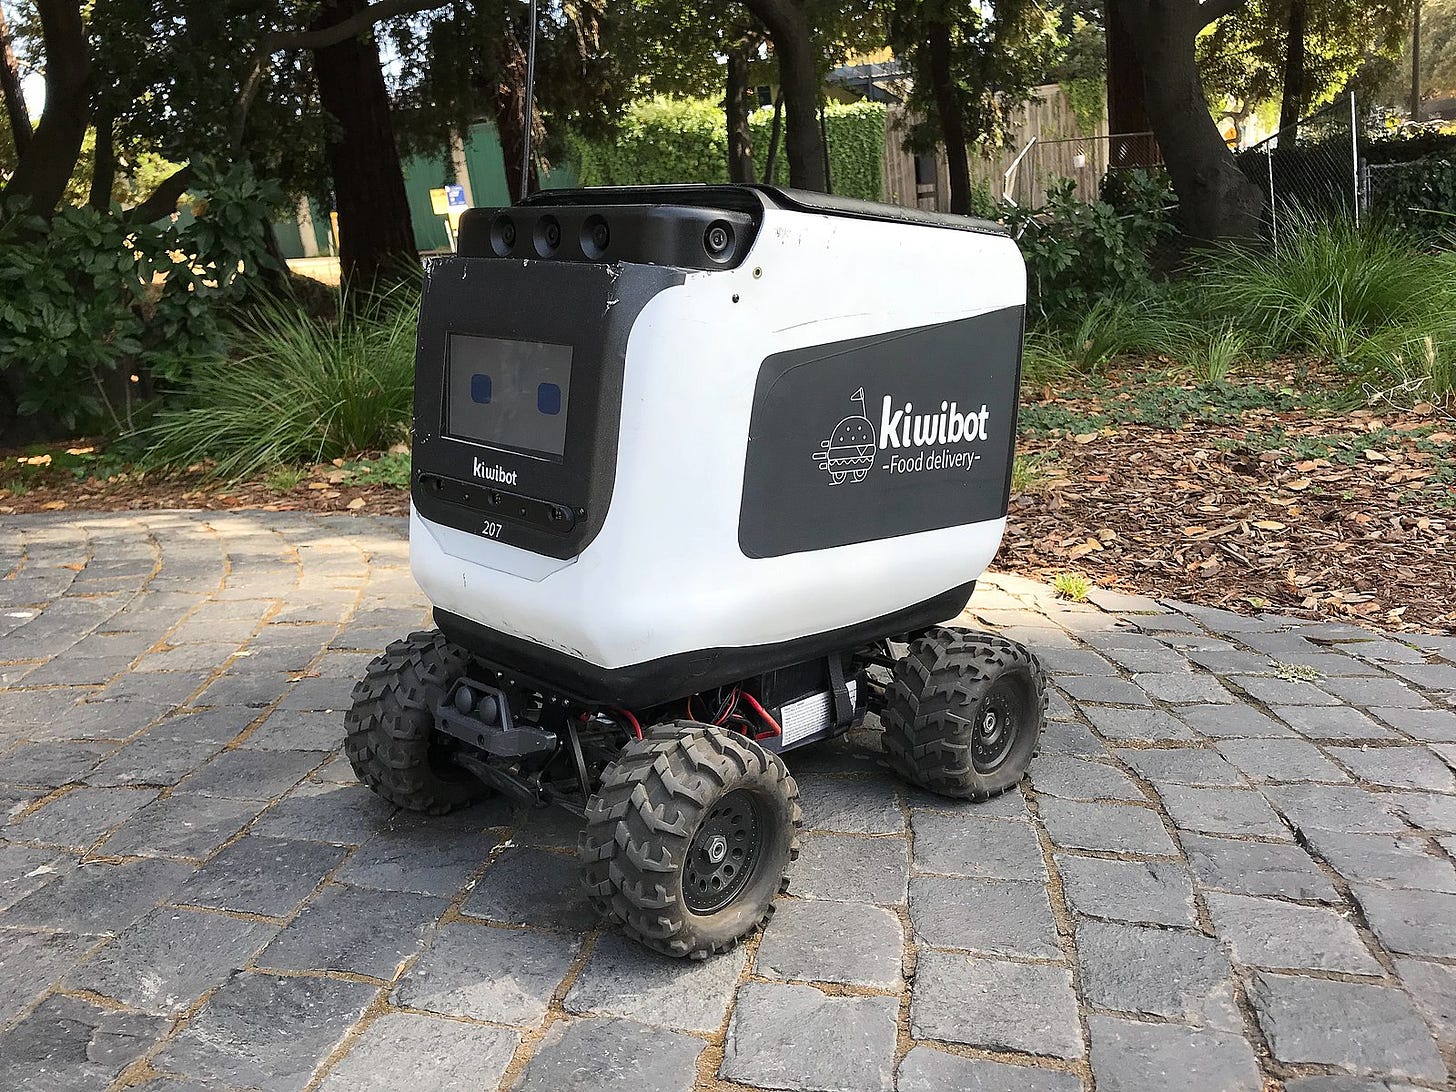 A boxy, four-wheeled Kiwibot food delivery robot seen from a front-facing, three-quarter perspective in a small stone plaza. Its tires have thick, monster-truck-style tread.